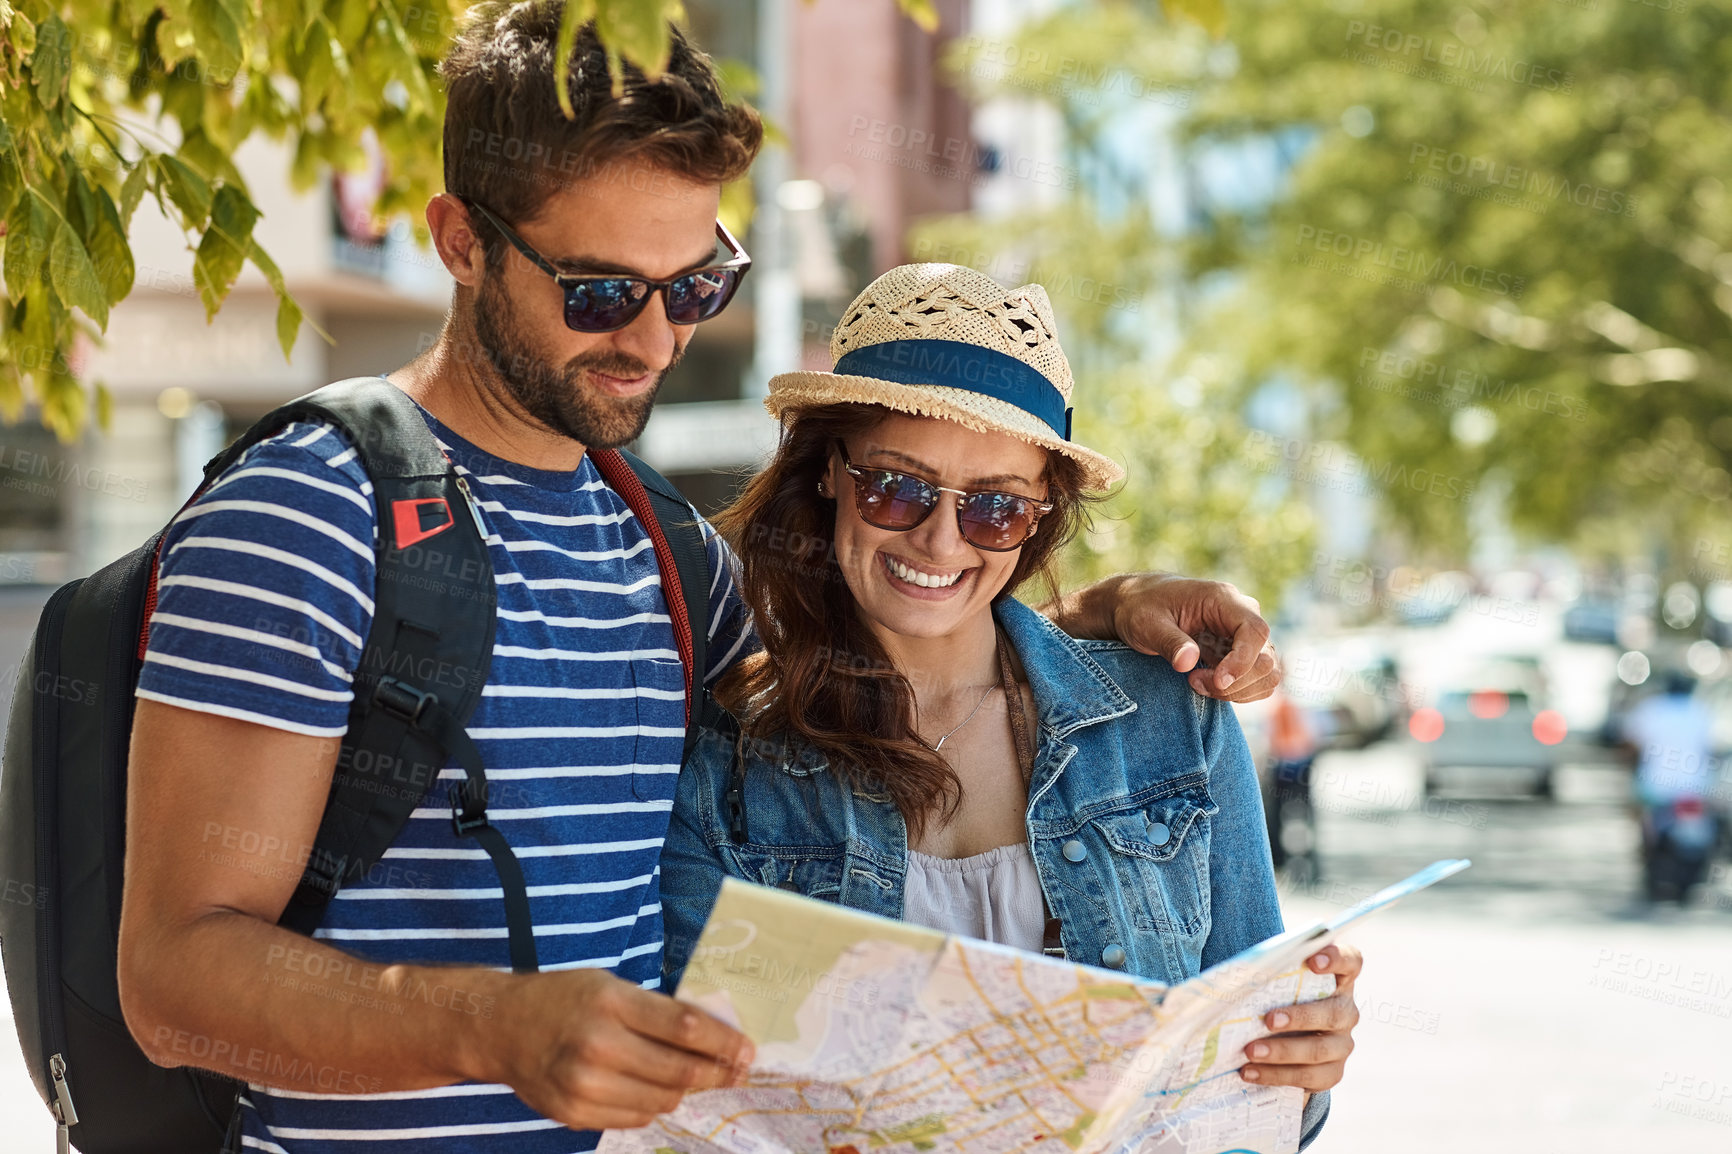 Buy stock photo Shot of a happy tourist couple using a map to explore a foreign city together